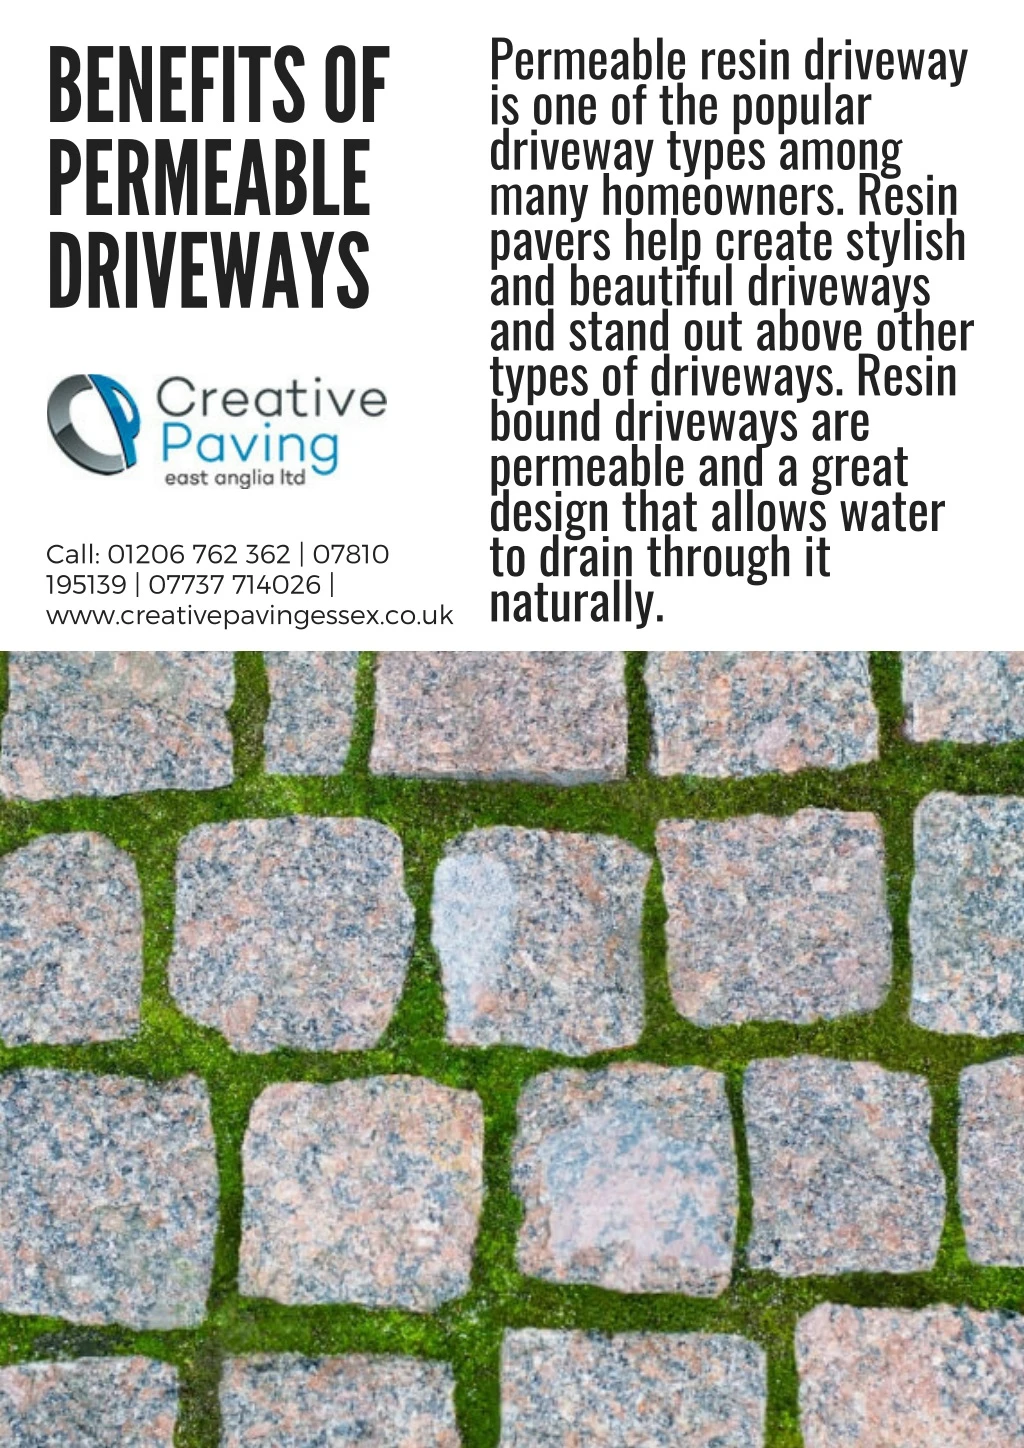 permeable resin driveway is one of the popular